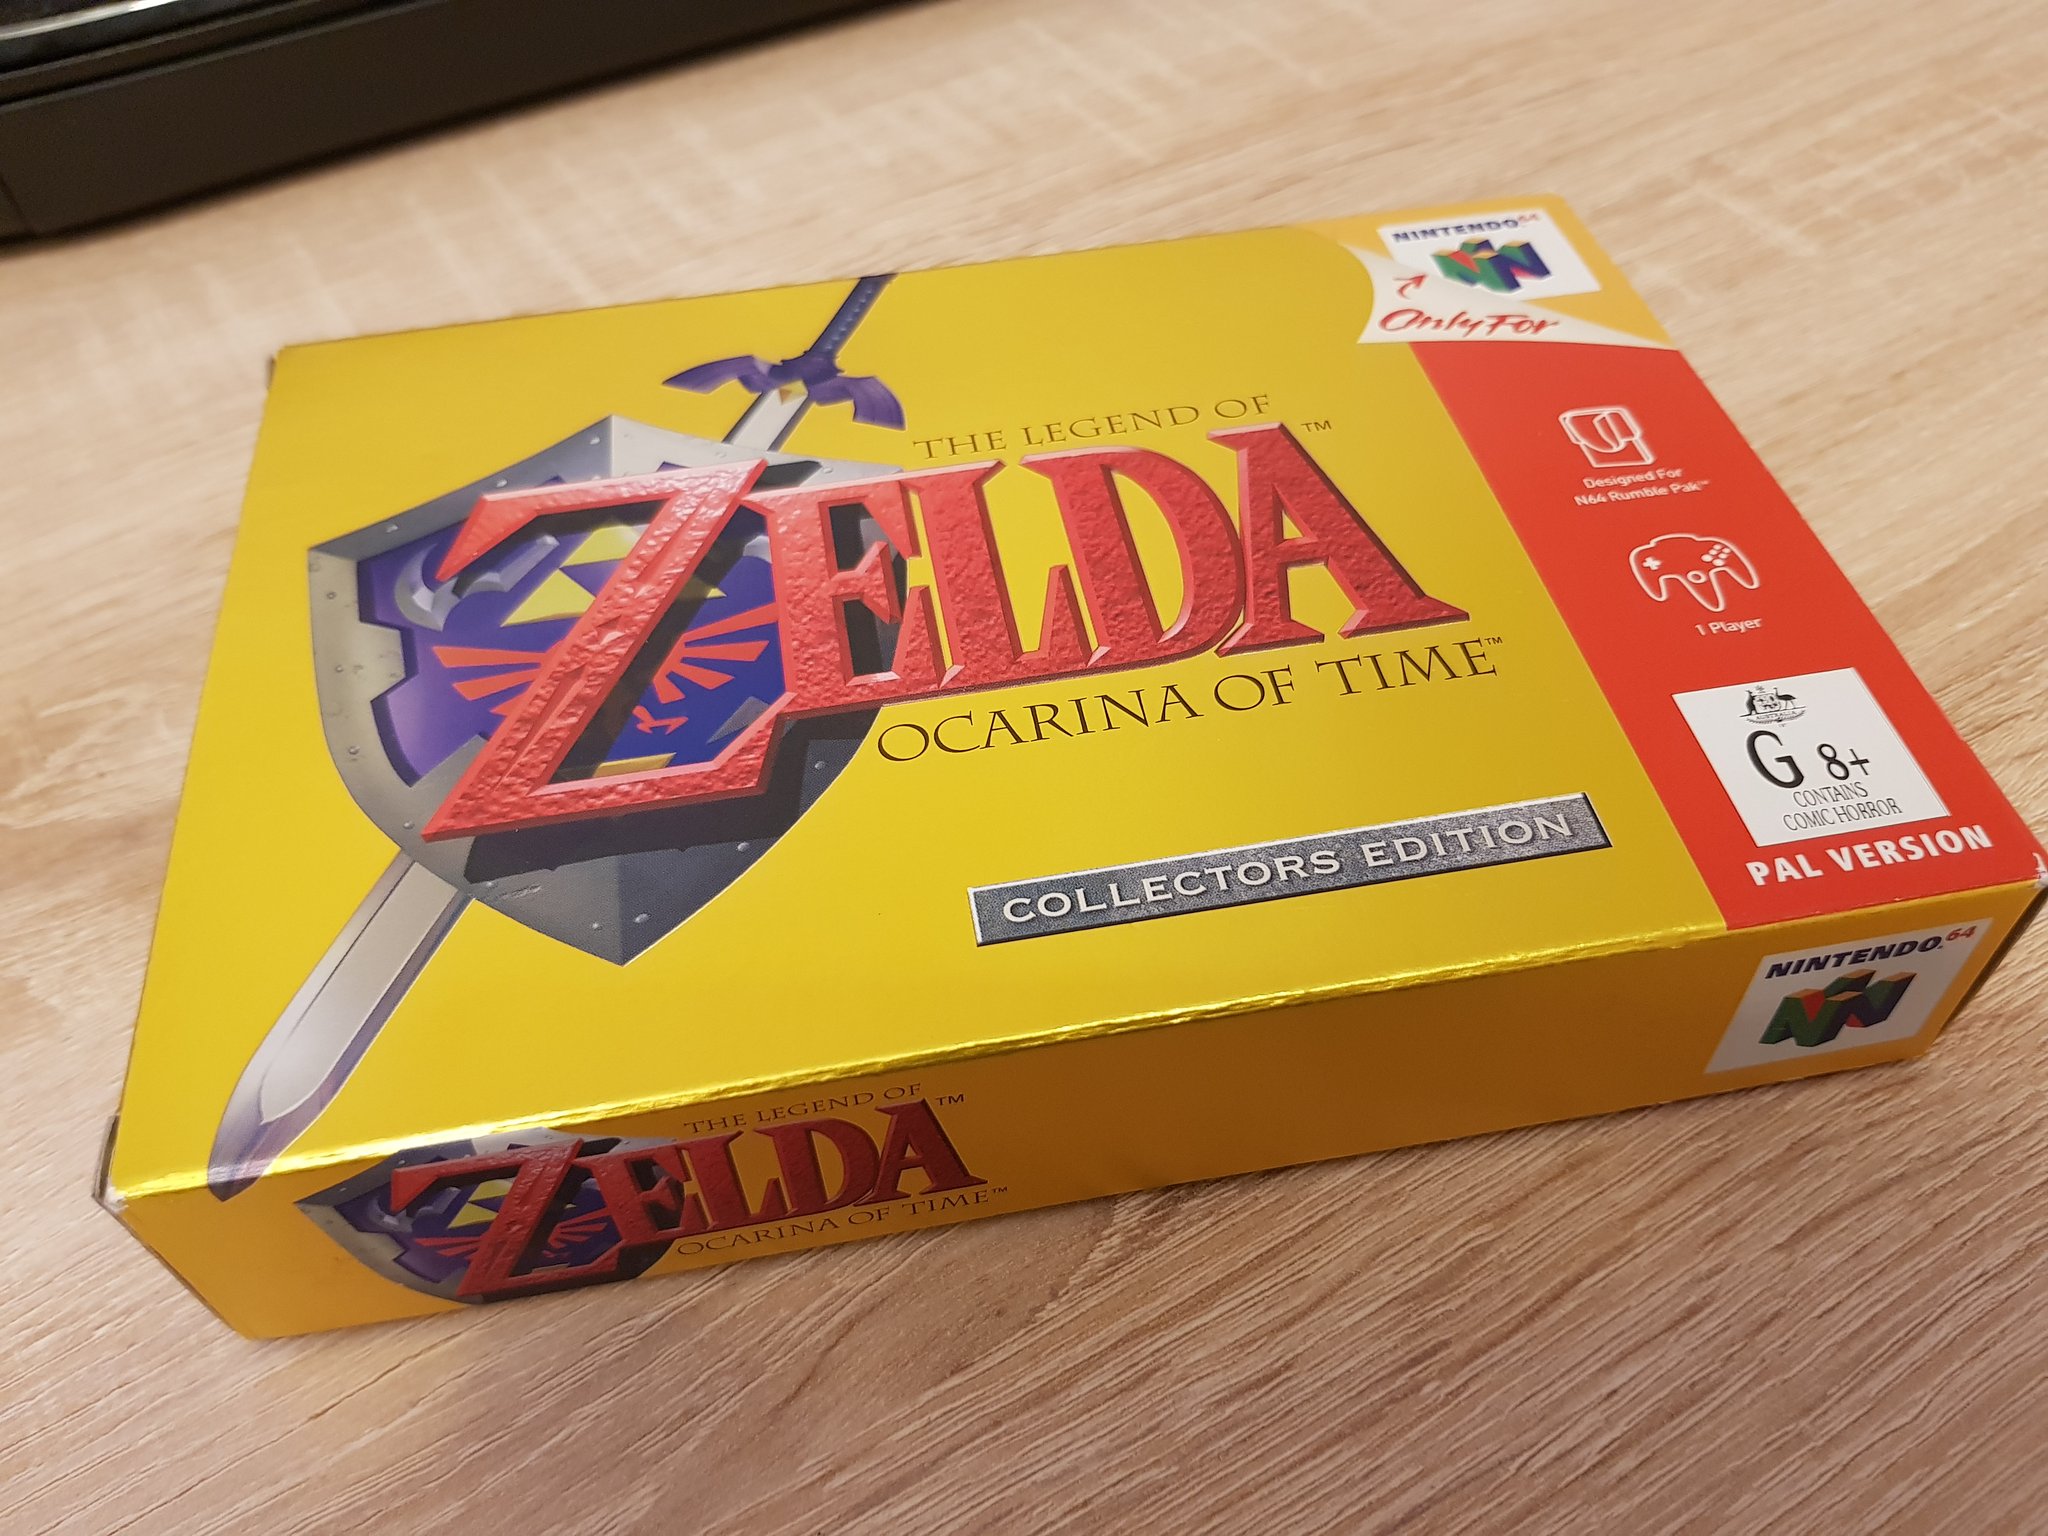 N64 Today on Twitter: "More shots of the awesome Australian PAL The Legend of Zelda: Ocarina of Collectors Edition. shiny! 😍 https://t.co/sllkLd7Cyp" / Twitter